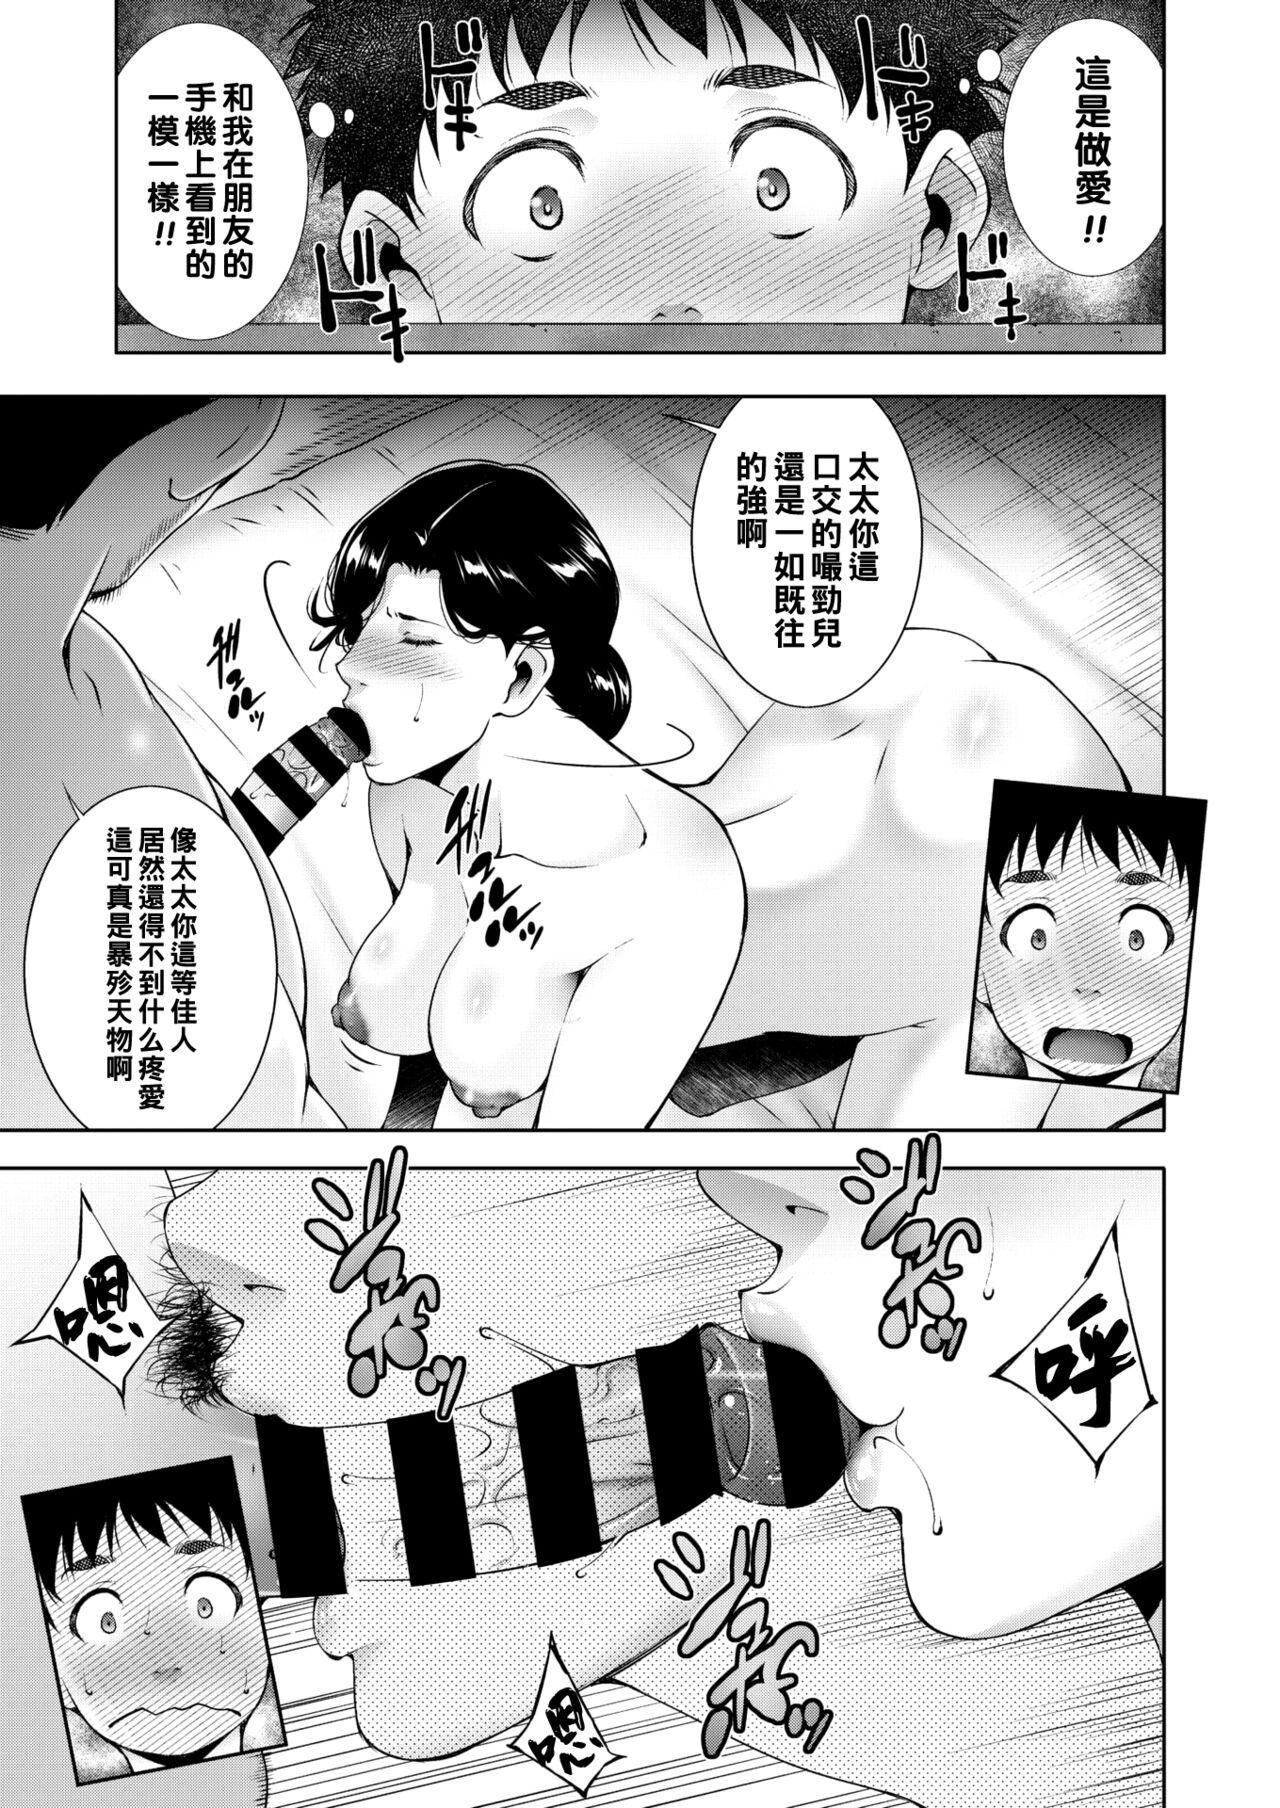 Hot Cunt オスに成った日（Chinese） Load - Page 5